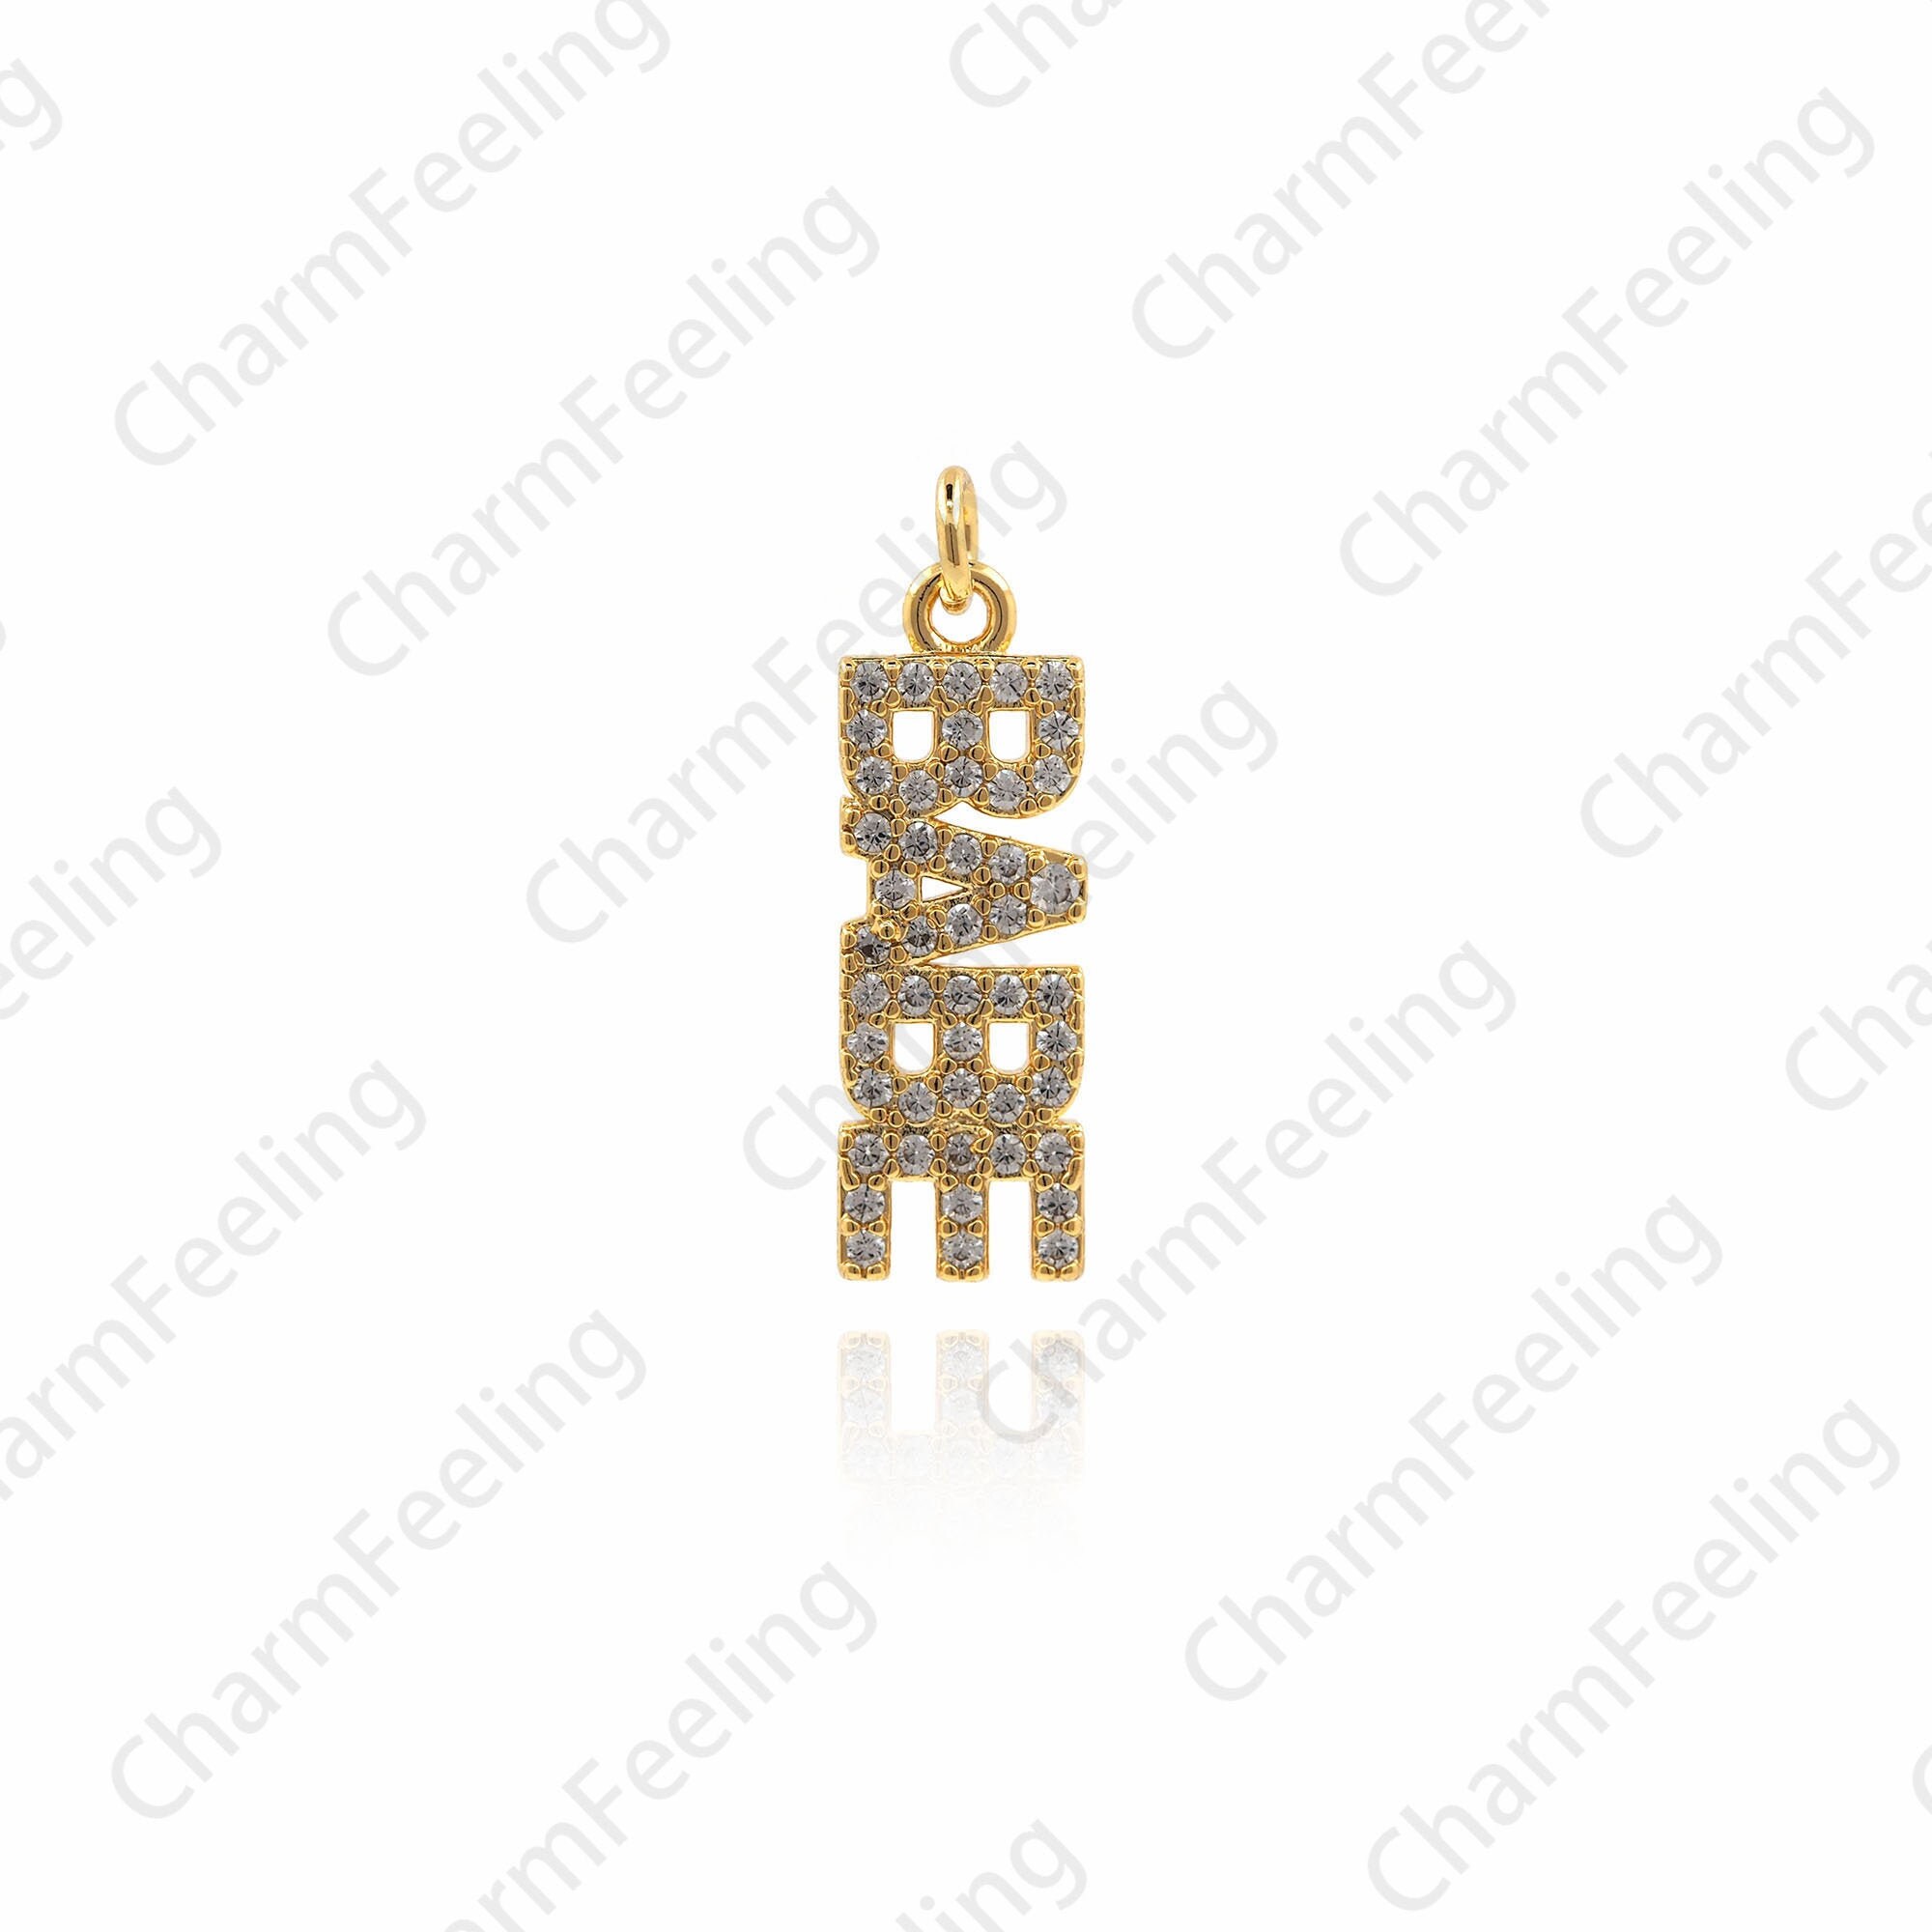 18K Gold Filled Babe Pendant, Babe Necklace, Charm, Micropav Cz Text 22x6.5x1.8mm